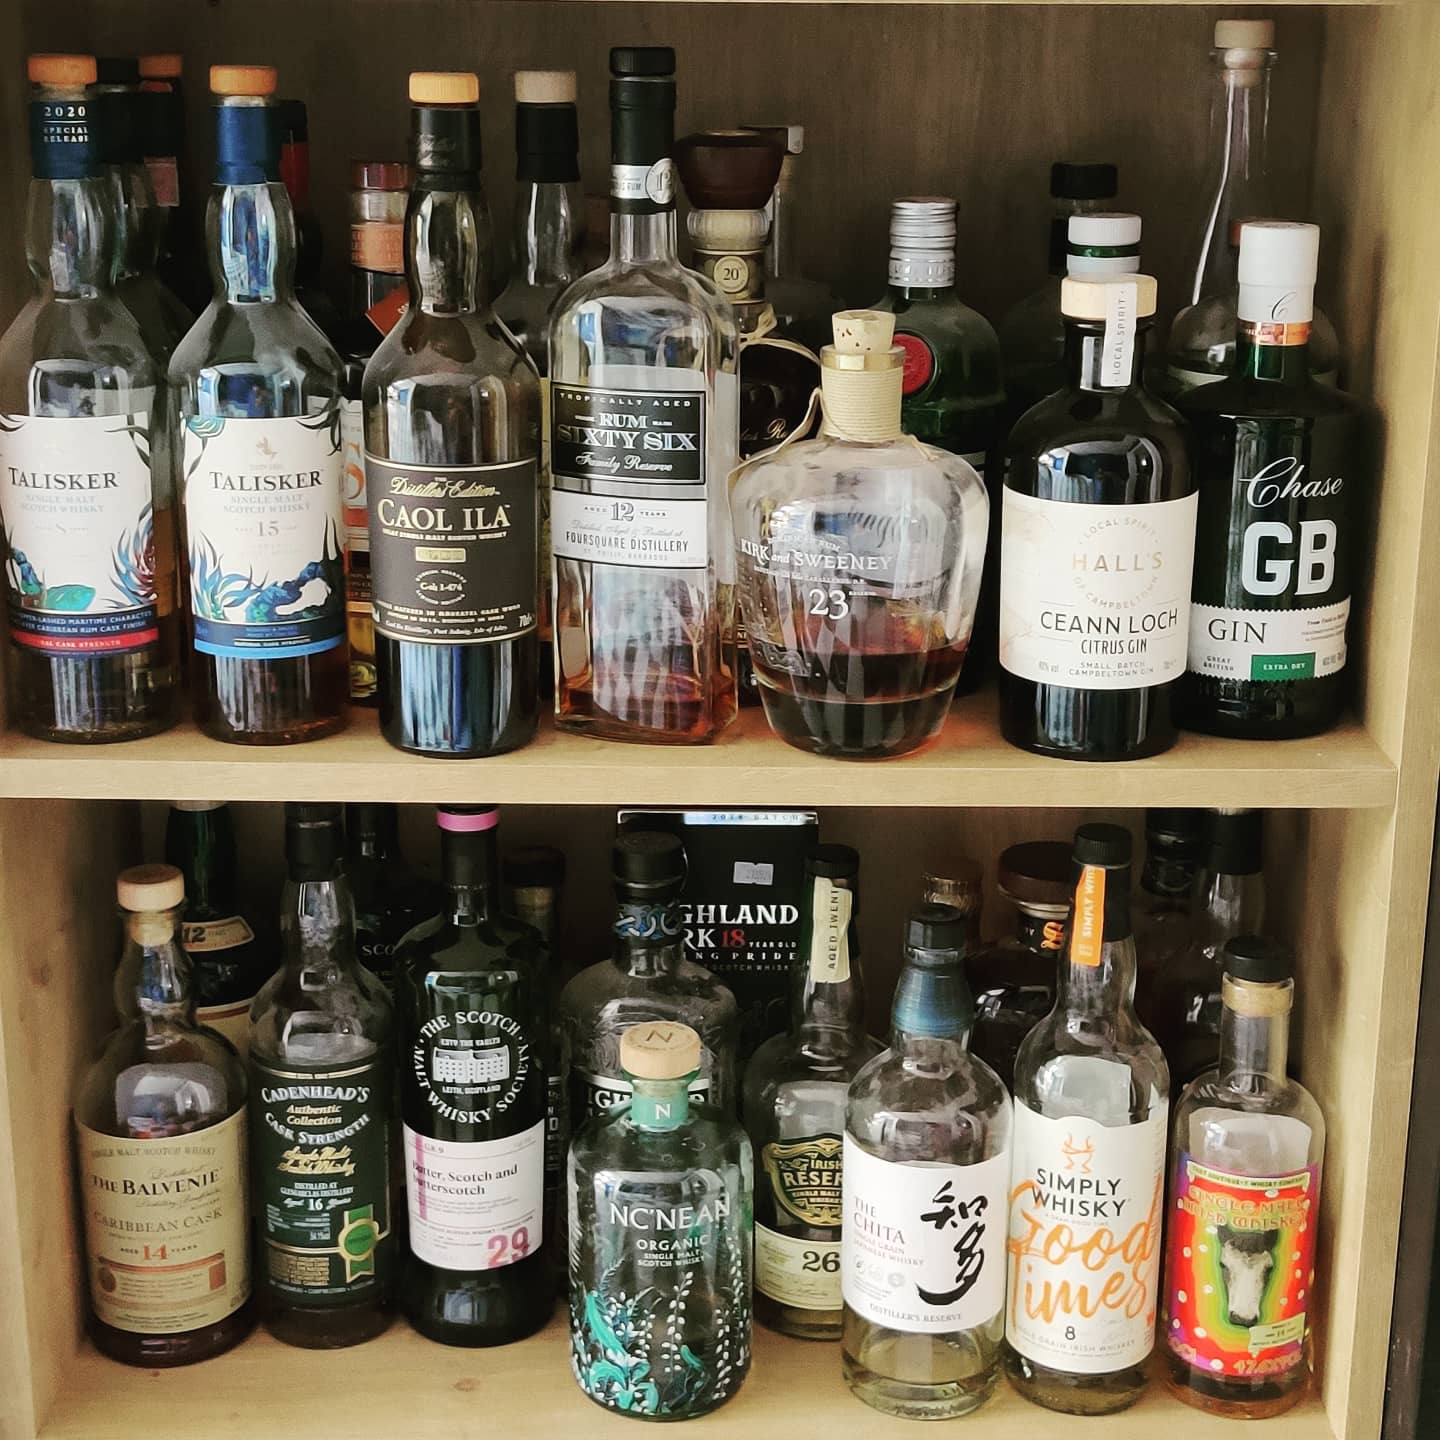 That's the spring-cleaning done then - "working" shelf in the kitchen sorted! Smokey top-left, rum in the middle, gin on the right, and the #shelfofhighballhappiness below.